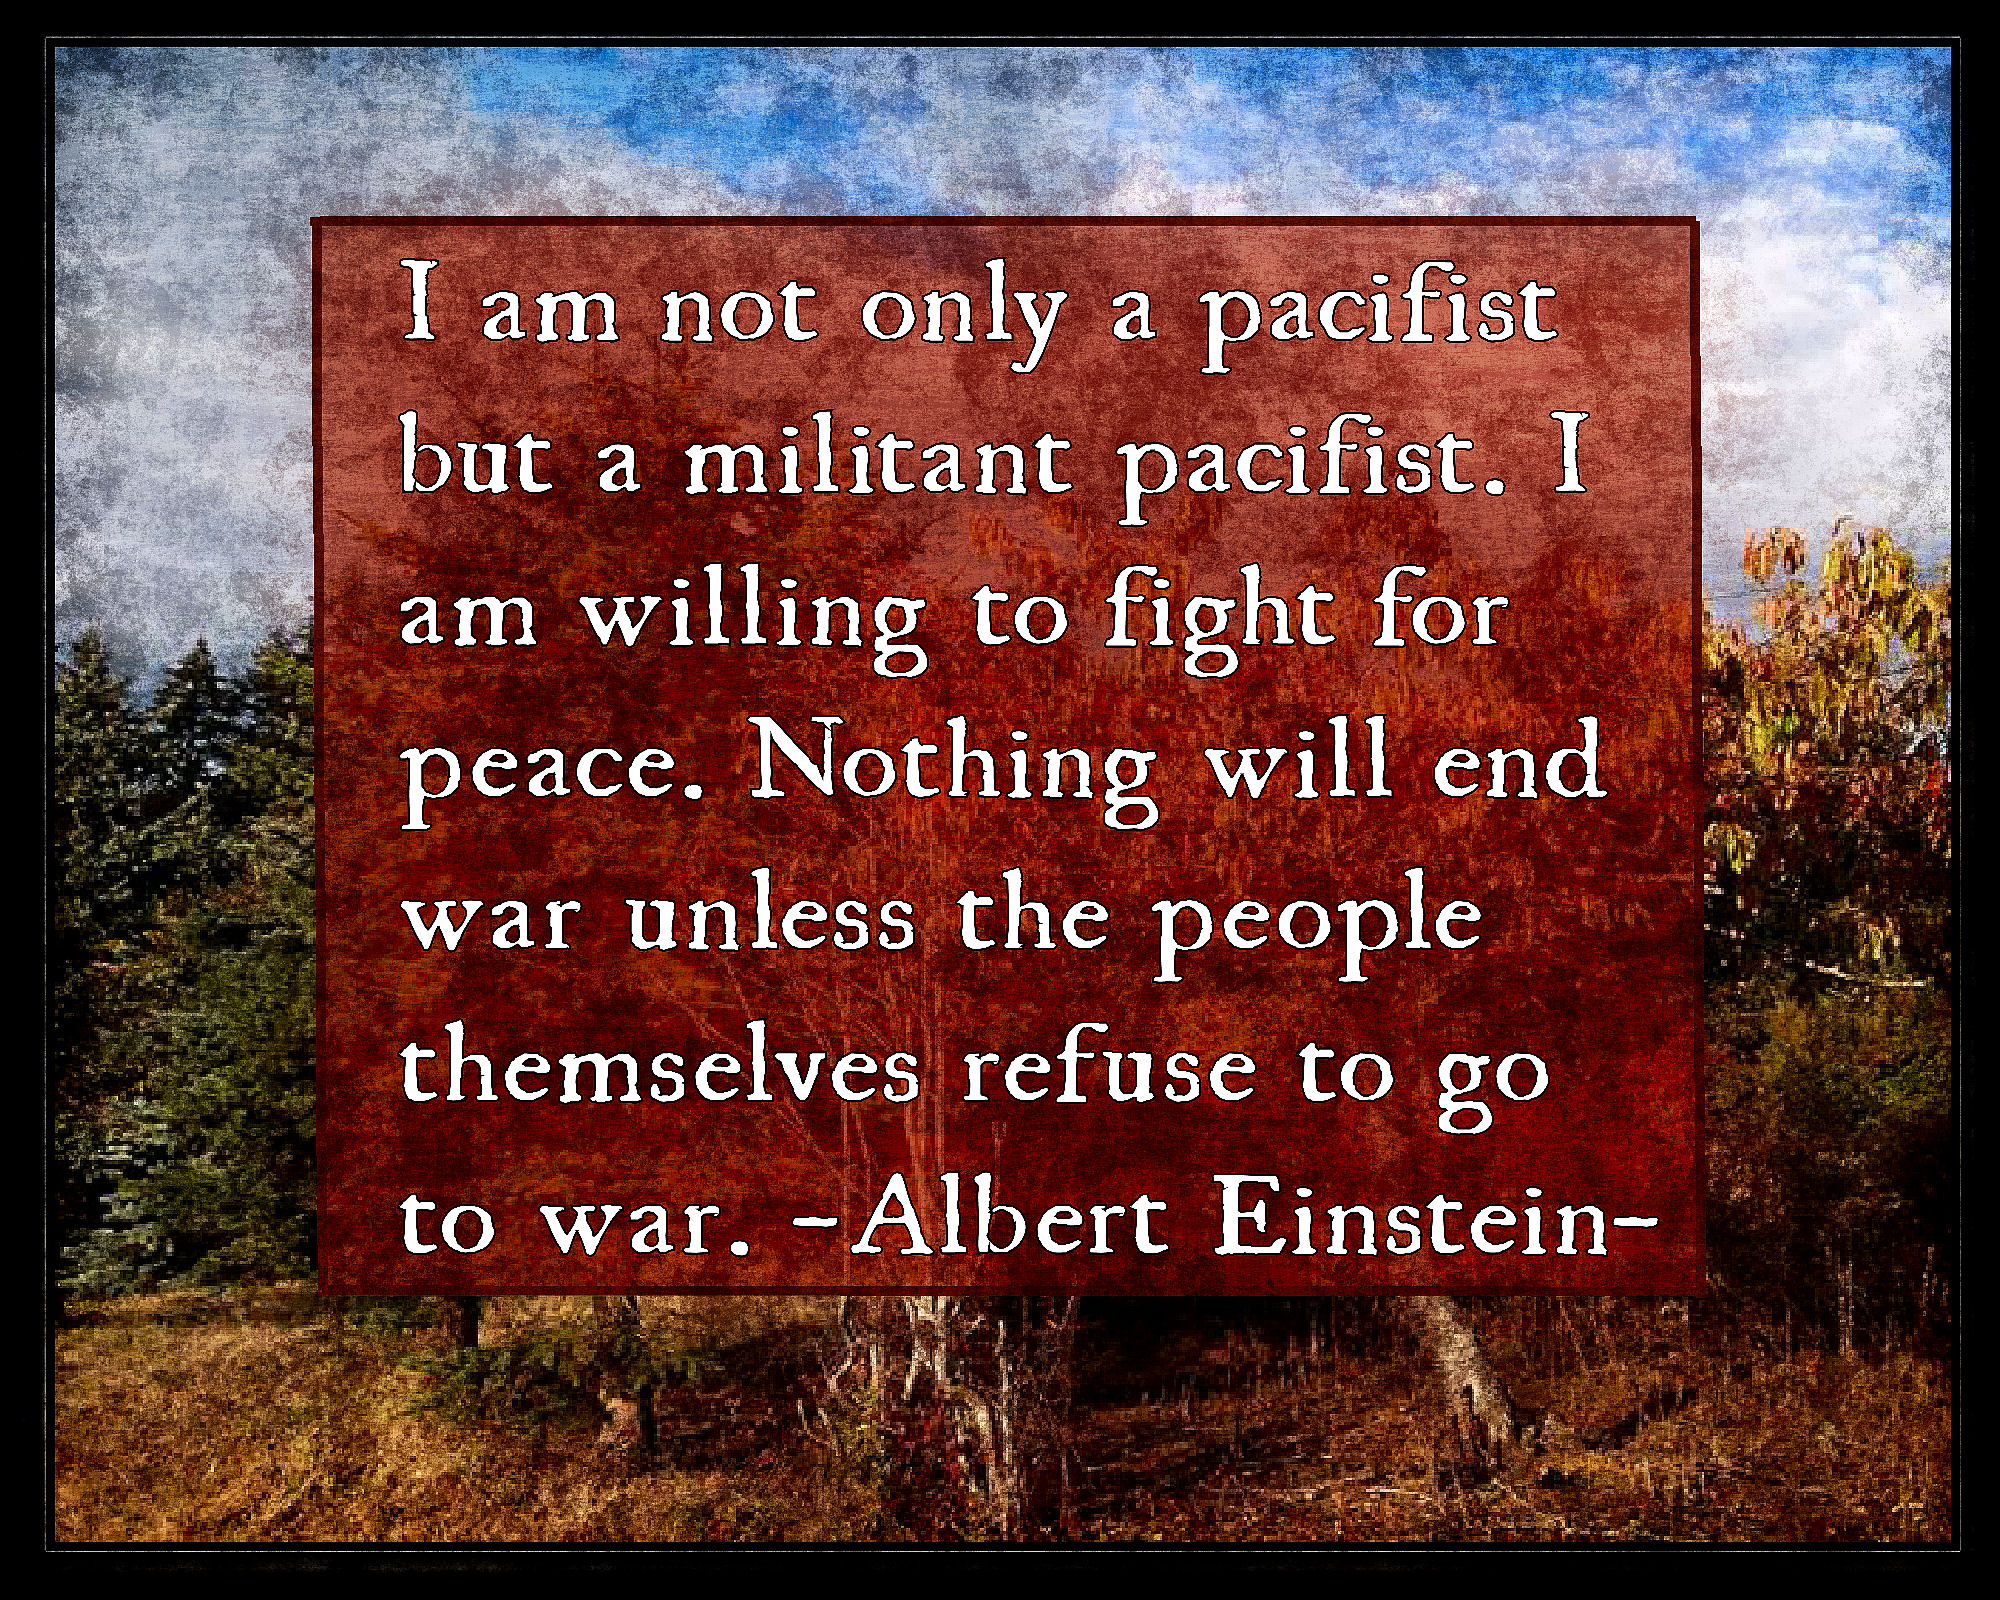 Quote by Albert Einstein. I am not only a pacifist, but a militant pacifist I am willing to fight for peace. Nothing will end war unless the people themselves refuse to go to war.